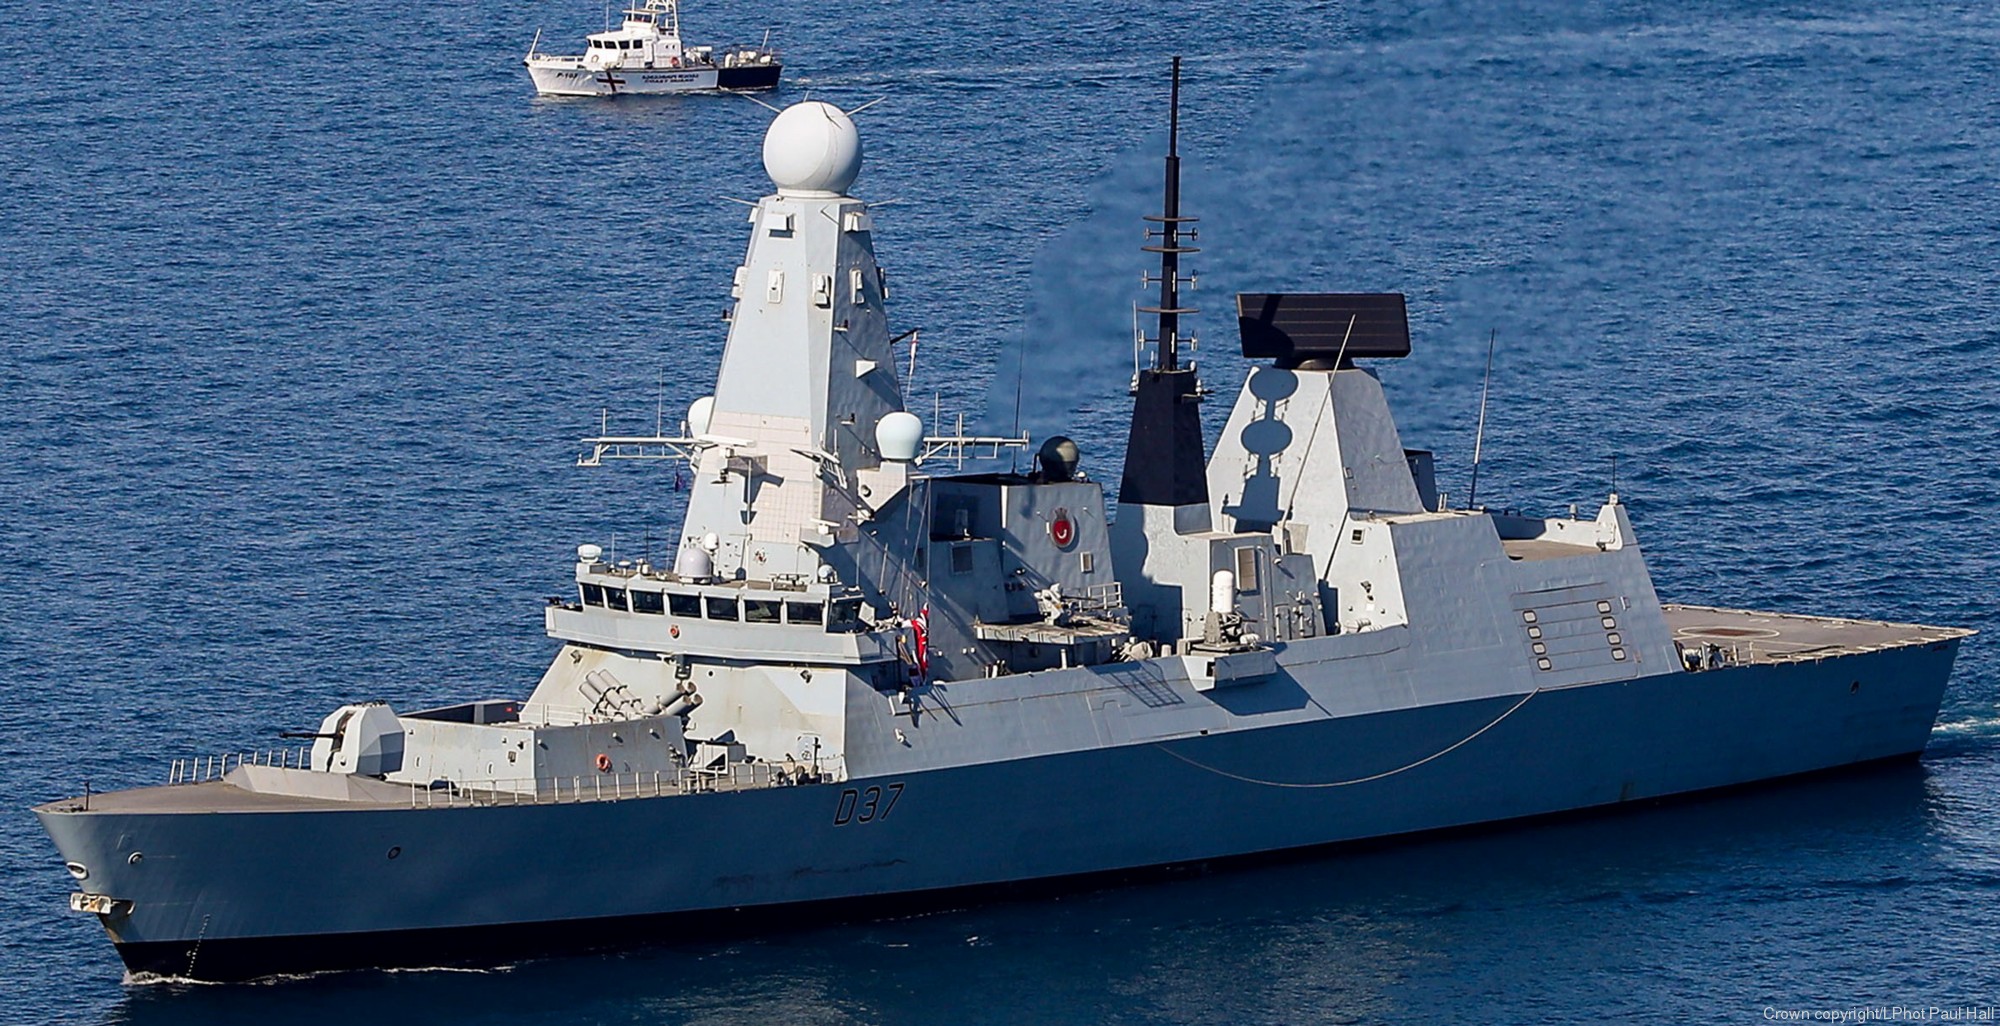 d37 hms duncan d-37 type 45 daring class guided missile destroyer ddg royal navy sea viper 55